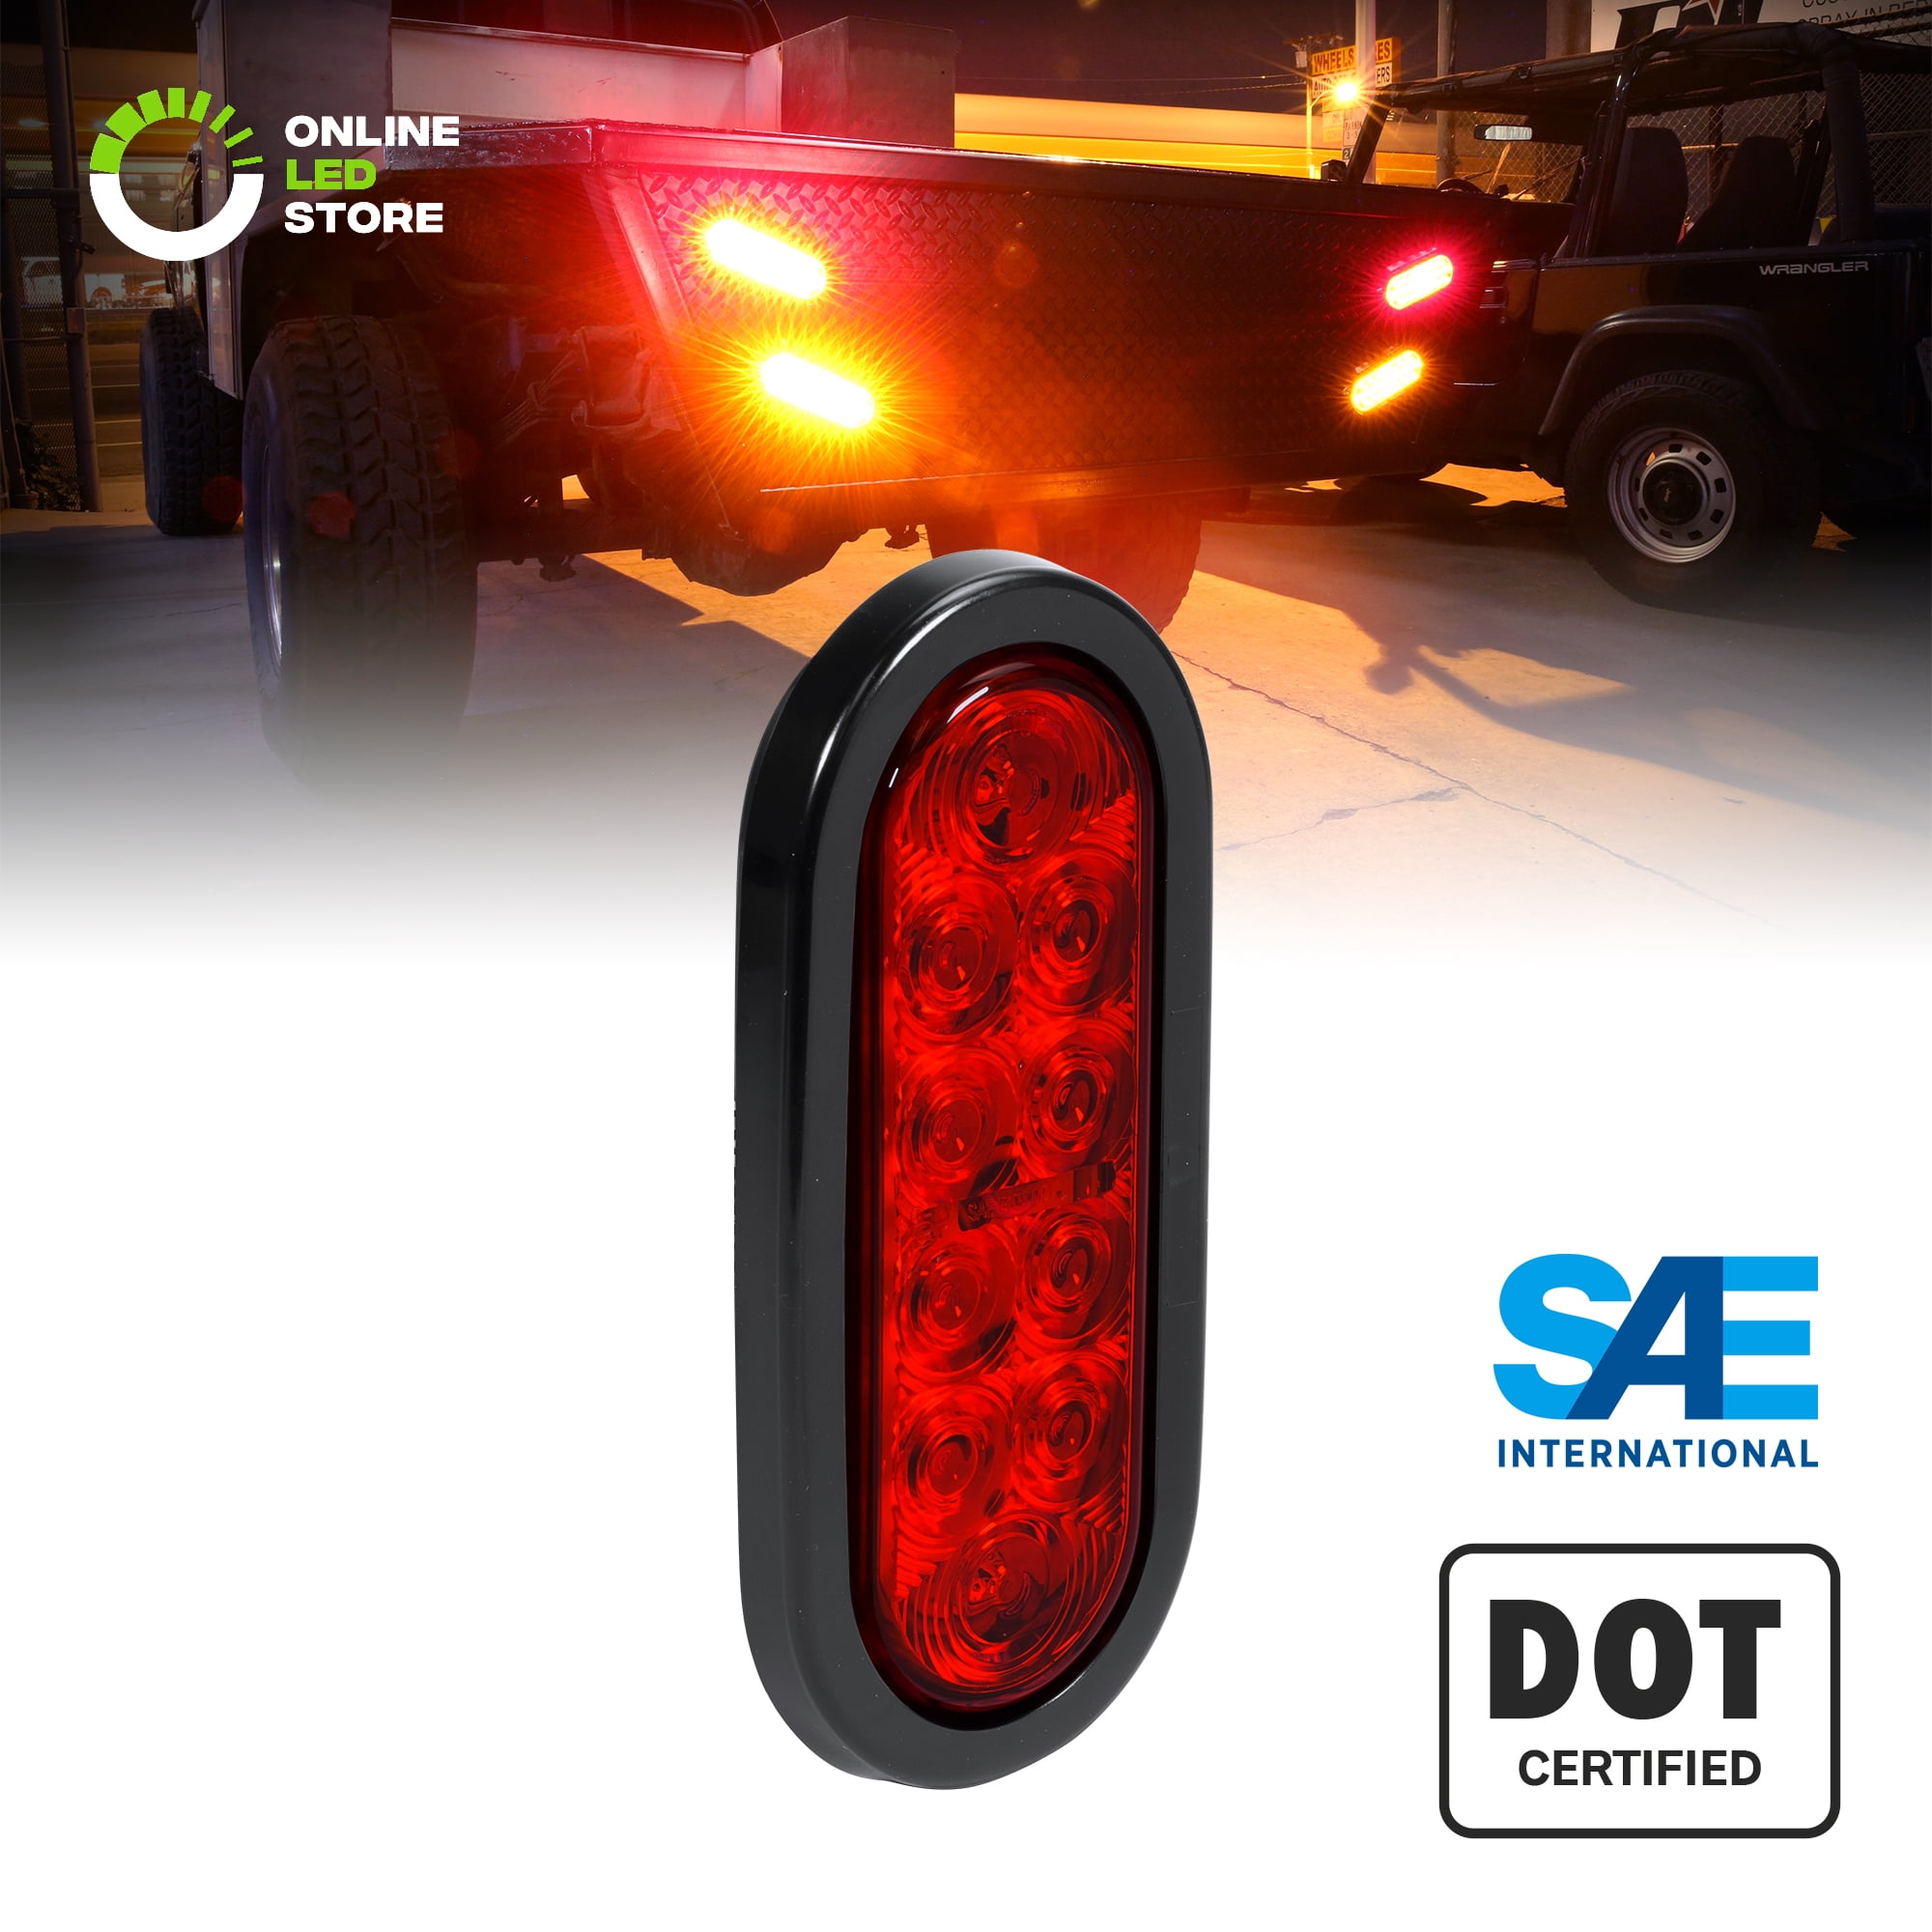 4 Inch Red LED Trailer Tail Light Grommet & Plugs Included RV Jeep Semi Truck Taillight 4 Pack 10 Bright LED Colored Lens Round Truck DOT Approved Stop Brake Turn Lights IP67 Waterproof 